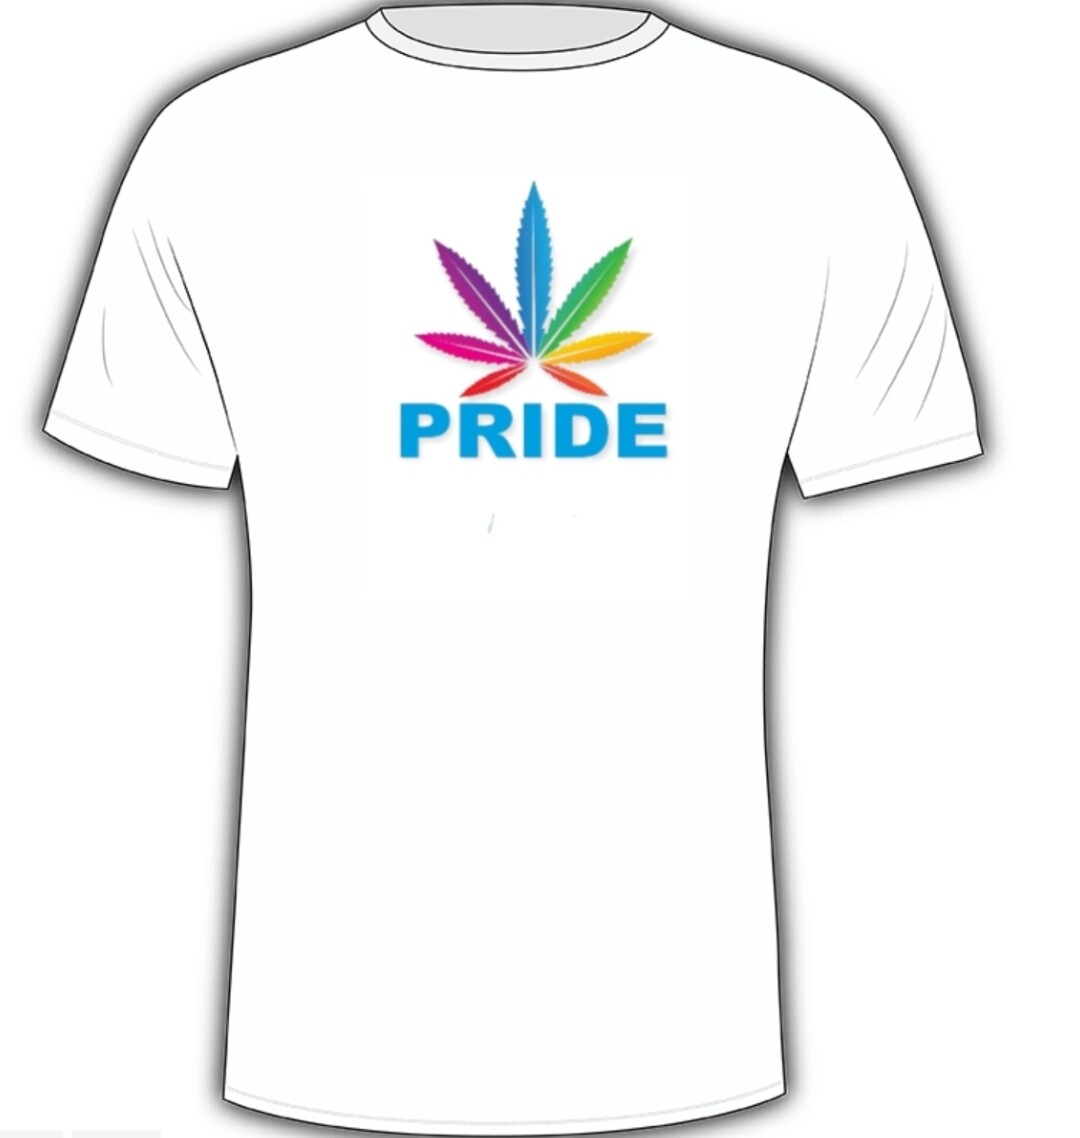 Pride 80/20 cotton poly blend slight faded look